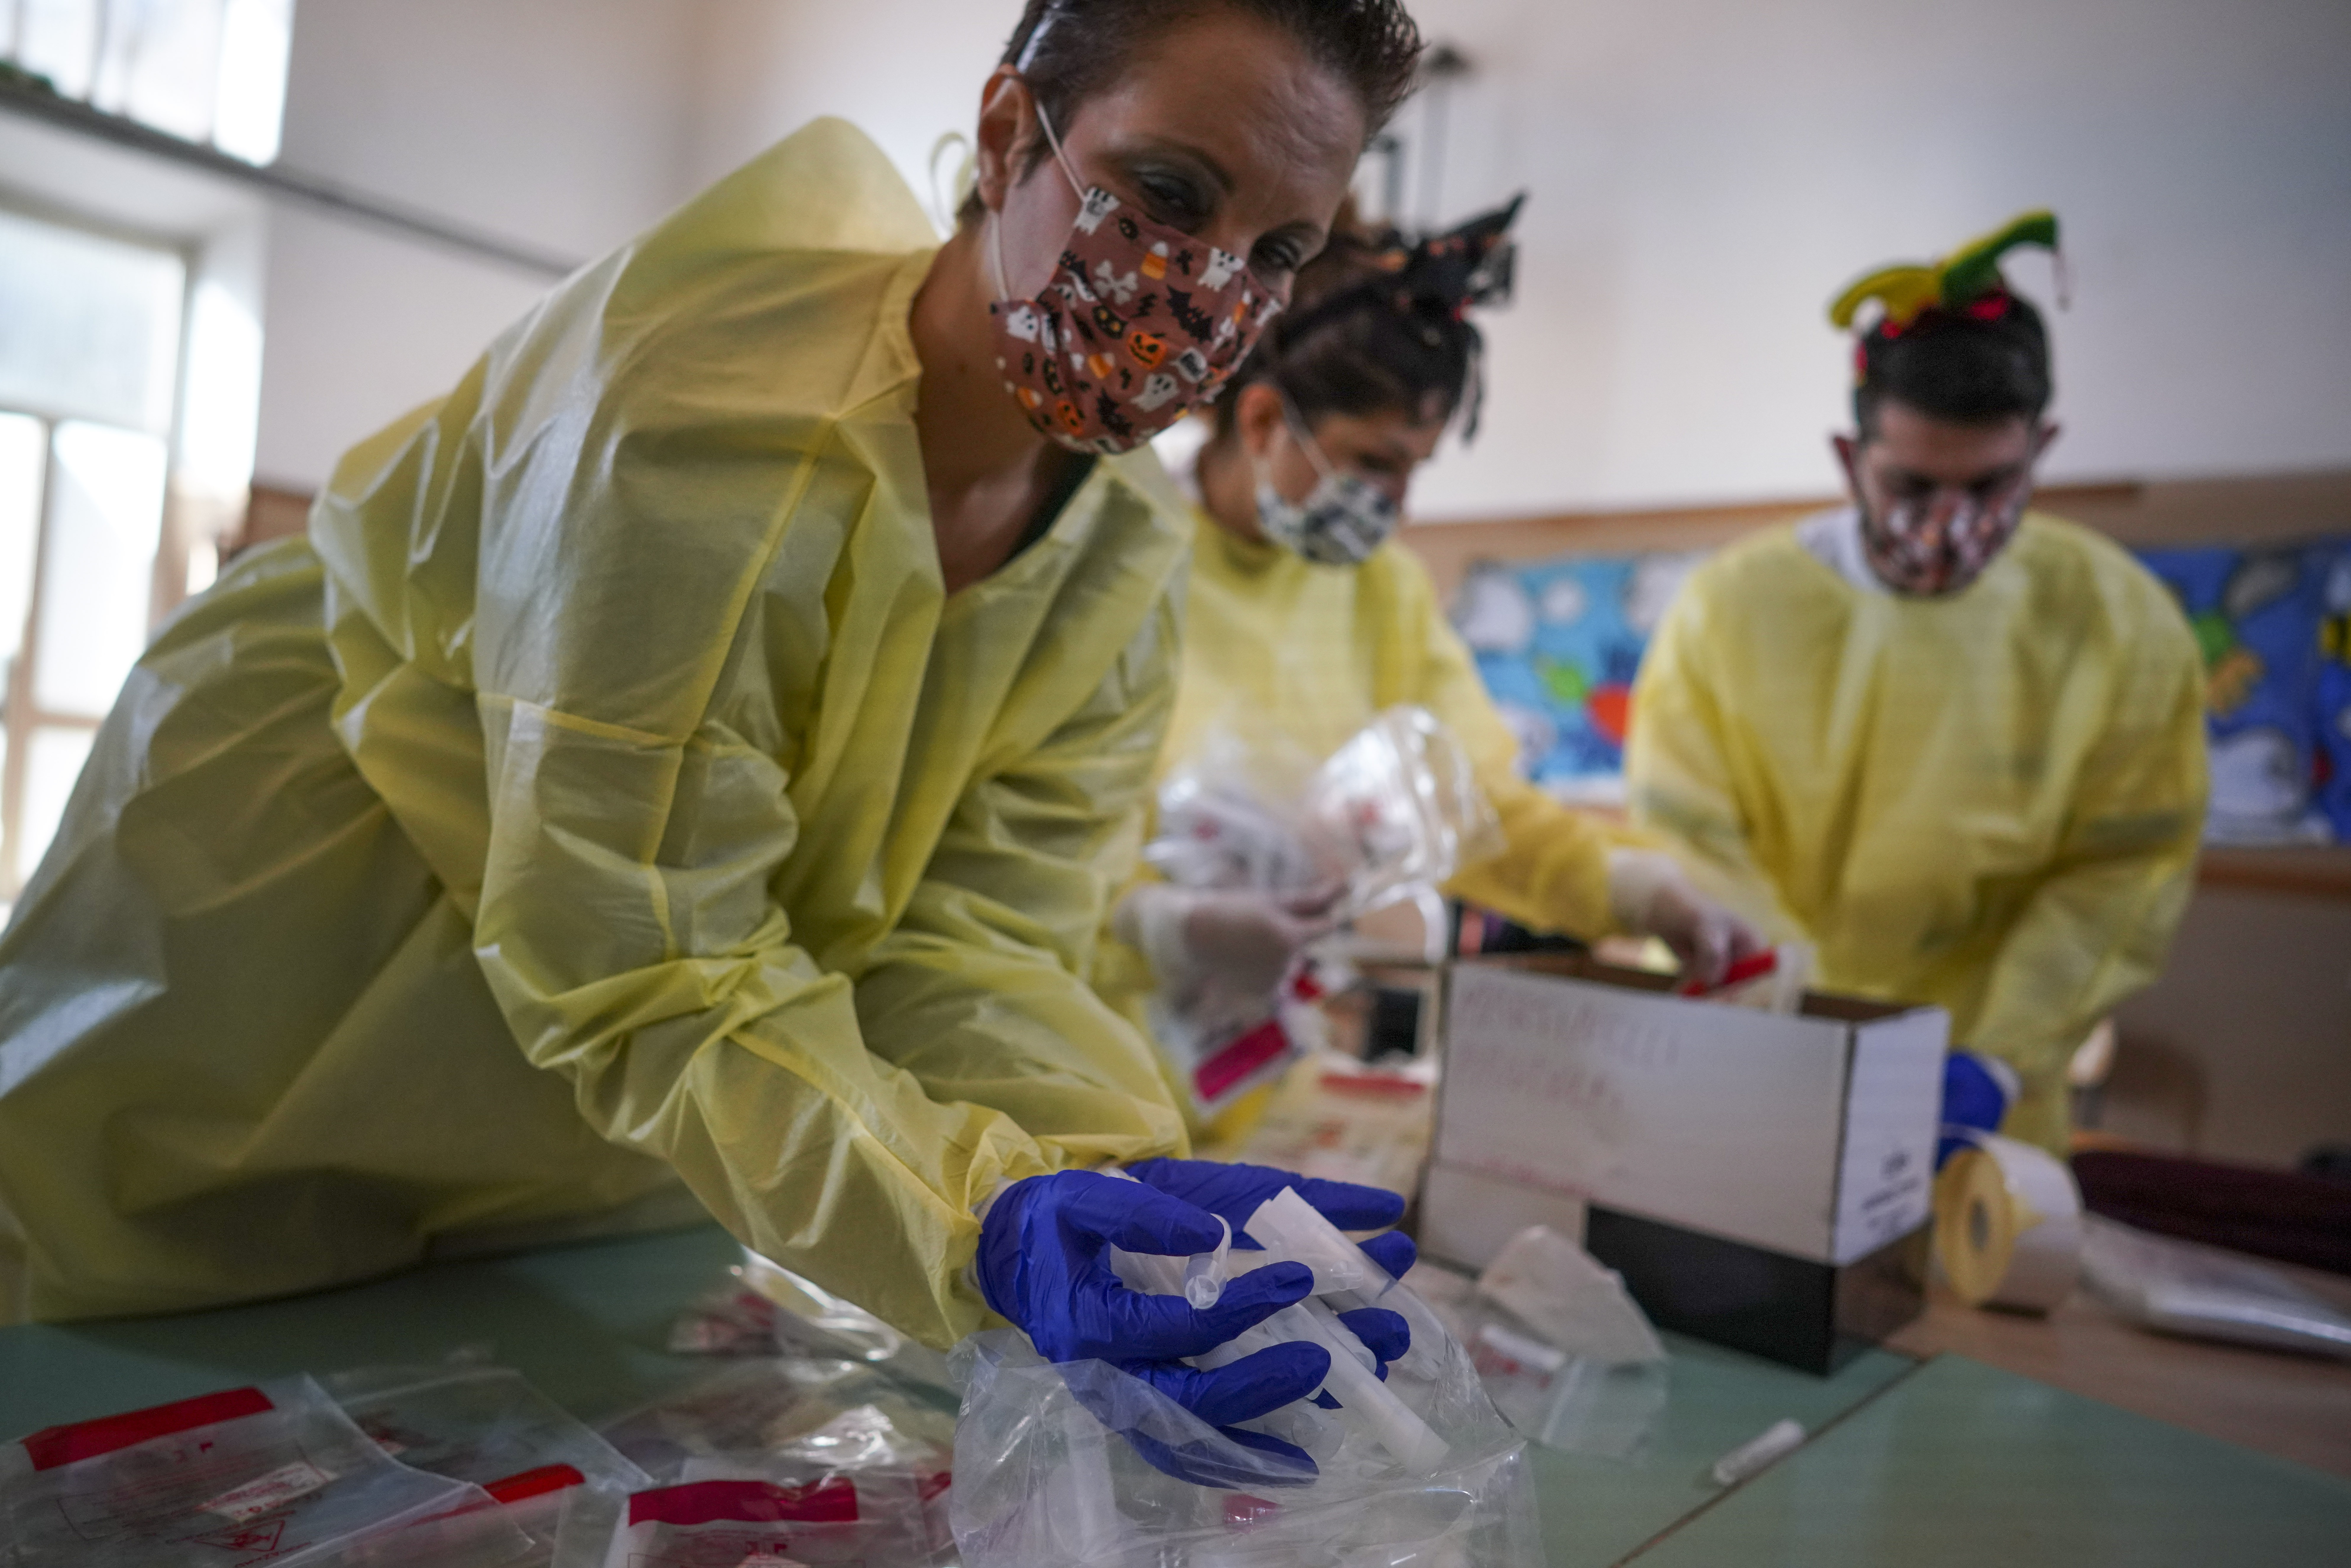 Medical personnel prepare non-invasive Covid 19 test with chewing gums at the G.B. Grassi school, in Fiumicino, near Rome, Tuesday, Oct. 6, 2020. (AP Photo/Andrew Medichini)